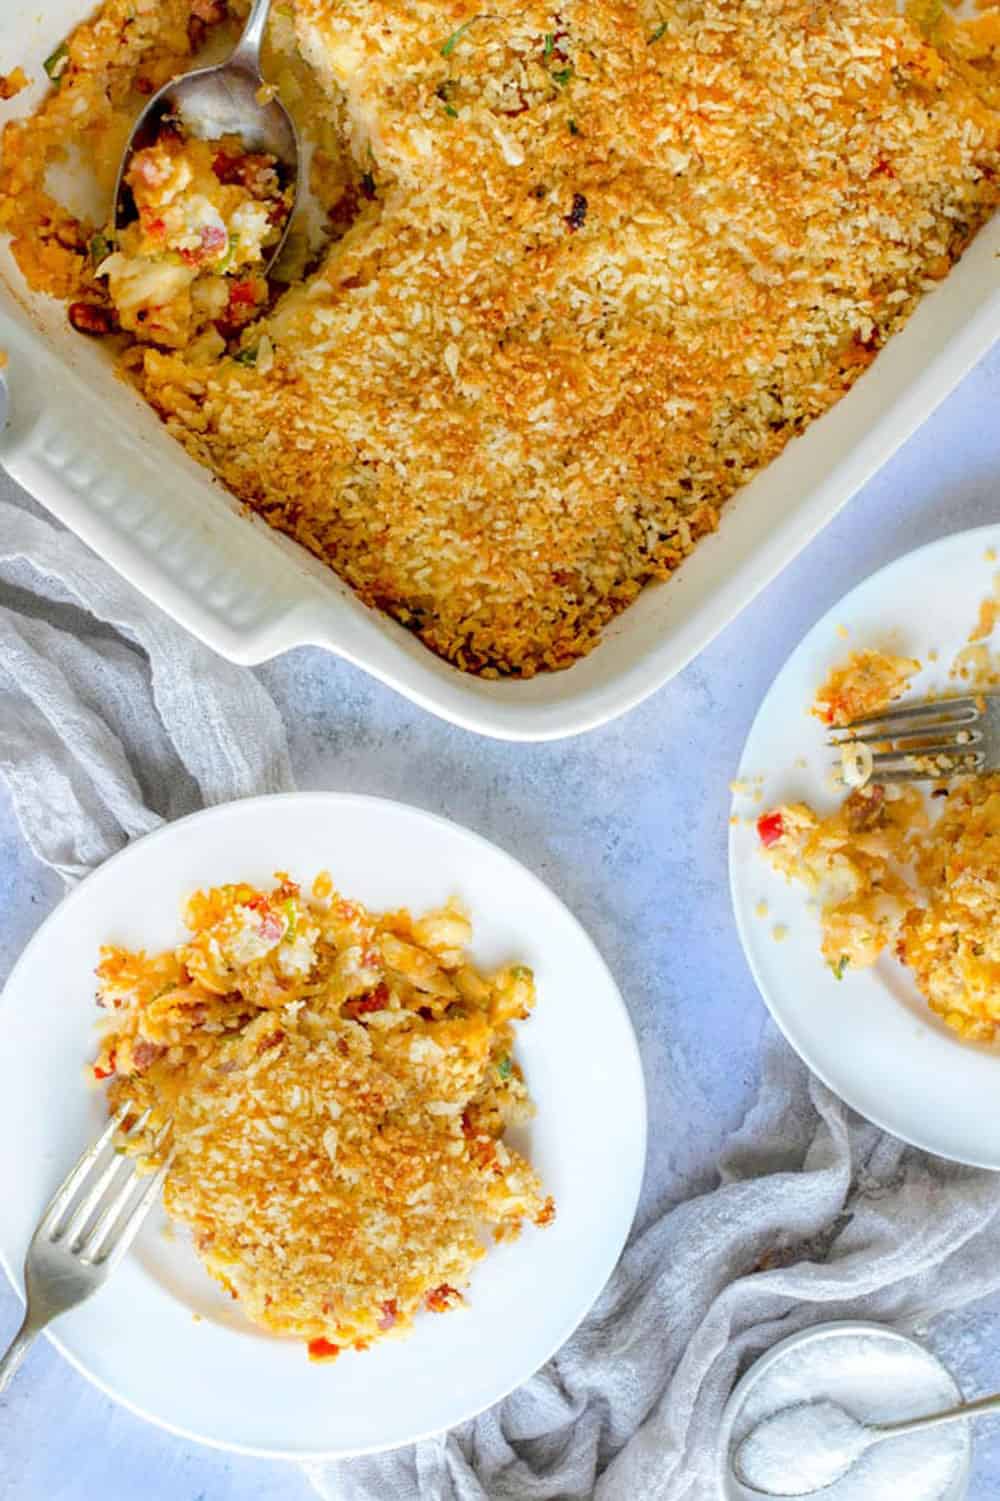 funeral potatoes in a rectangular casserole dish from above, with a plate that has a portion.